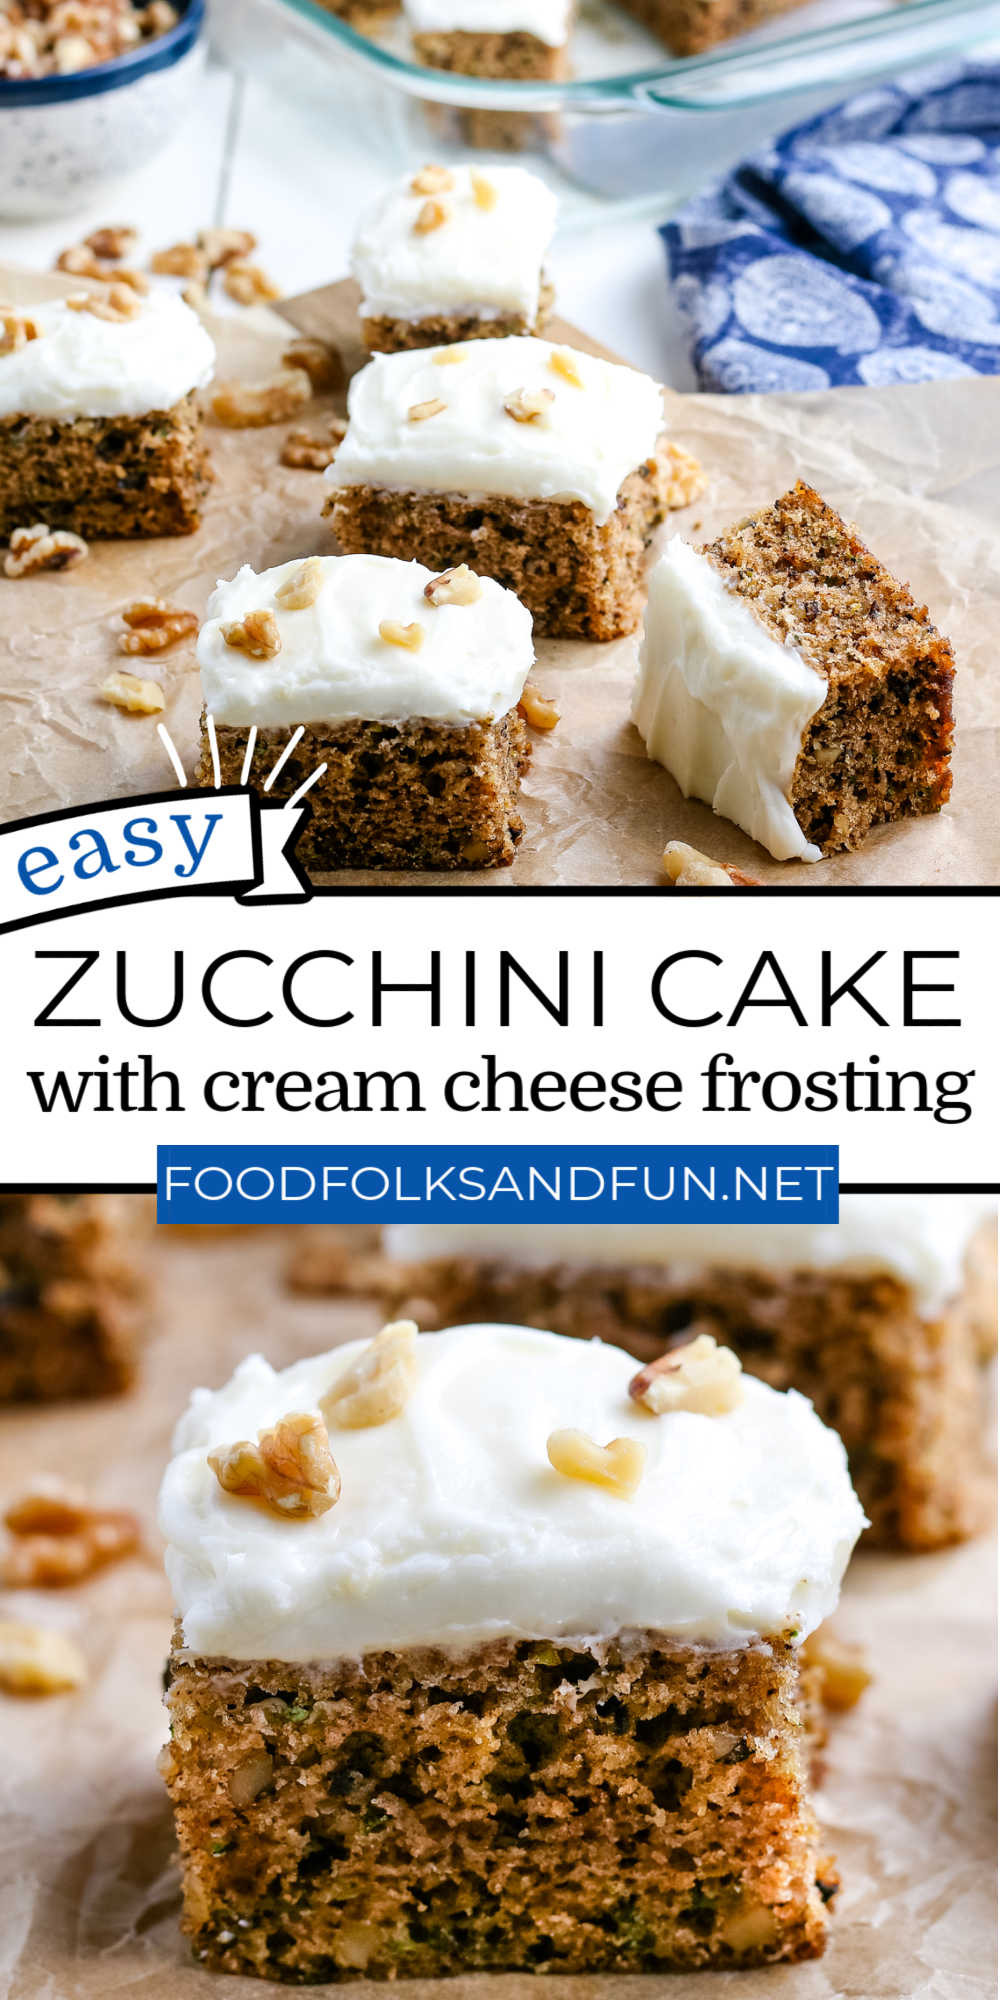 This Zucchini Cake With Cream Cheese Frosting is a simple from-scratch recipe with all the essential elements: a spiced, moist cake with zucchini throughout and fluffy cream cheese frosting. via @foodfolksandfun